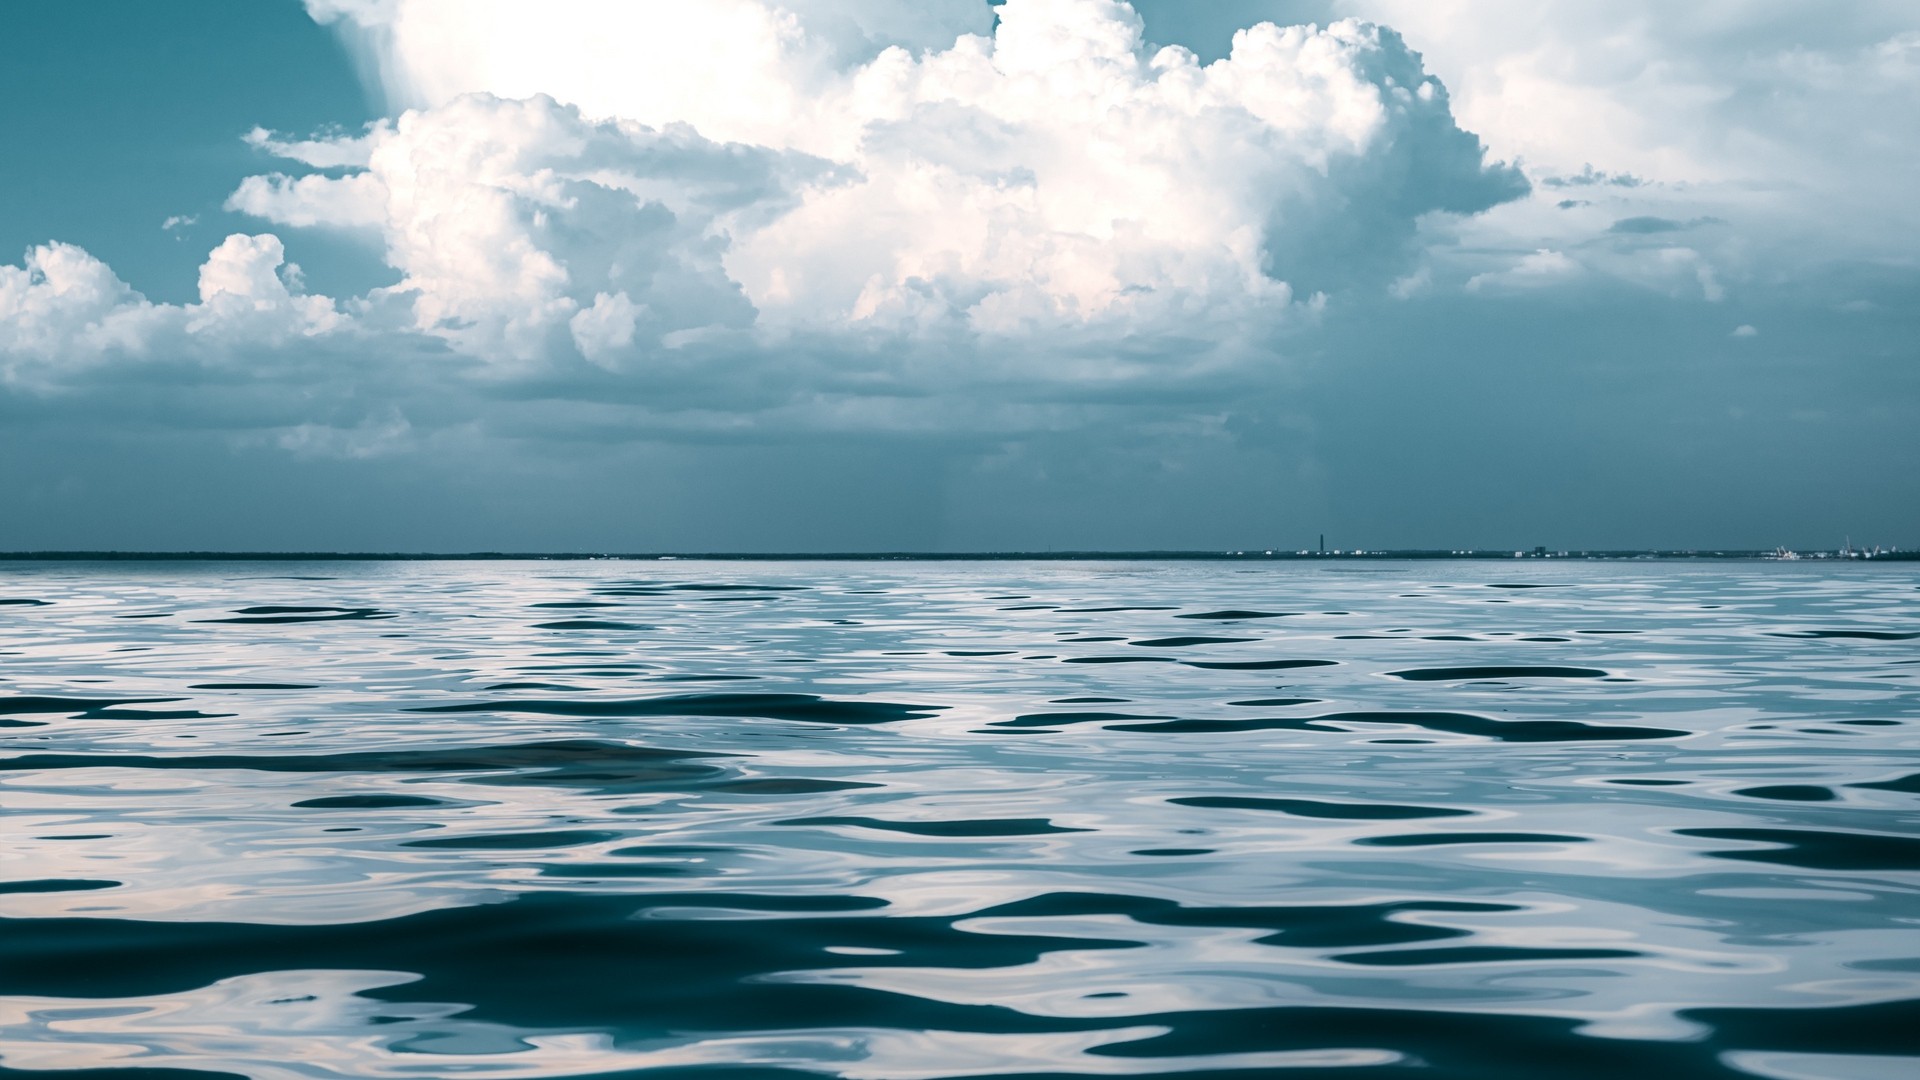 1920x1080 wallpapers: sea, sky, clouds, waves (image)